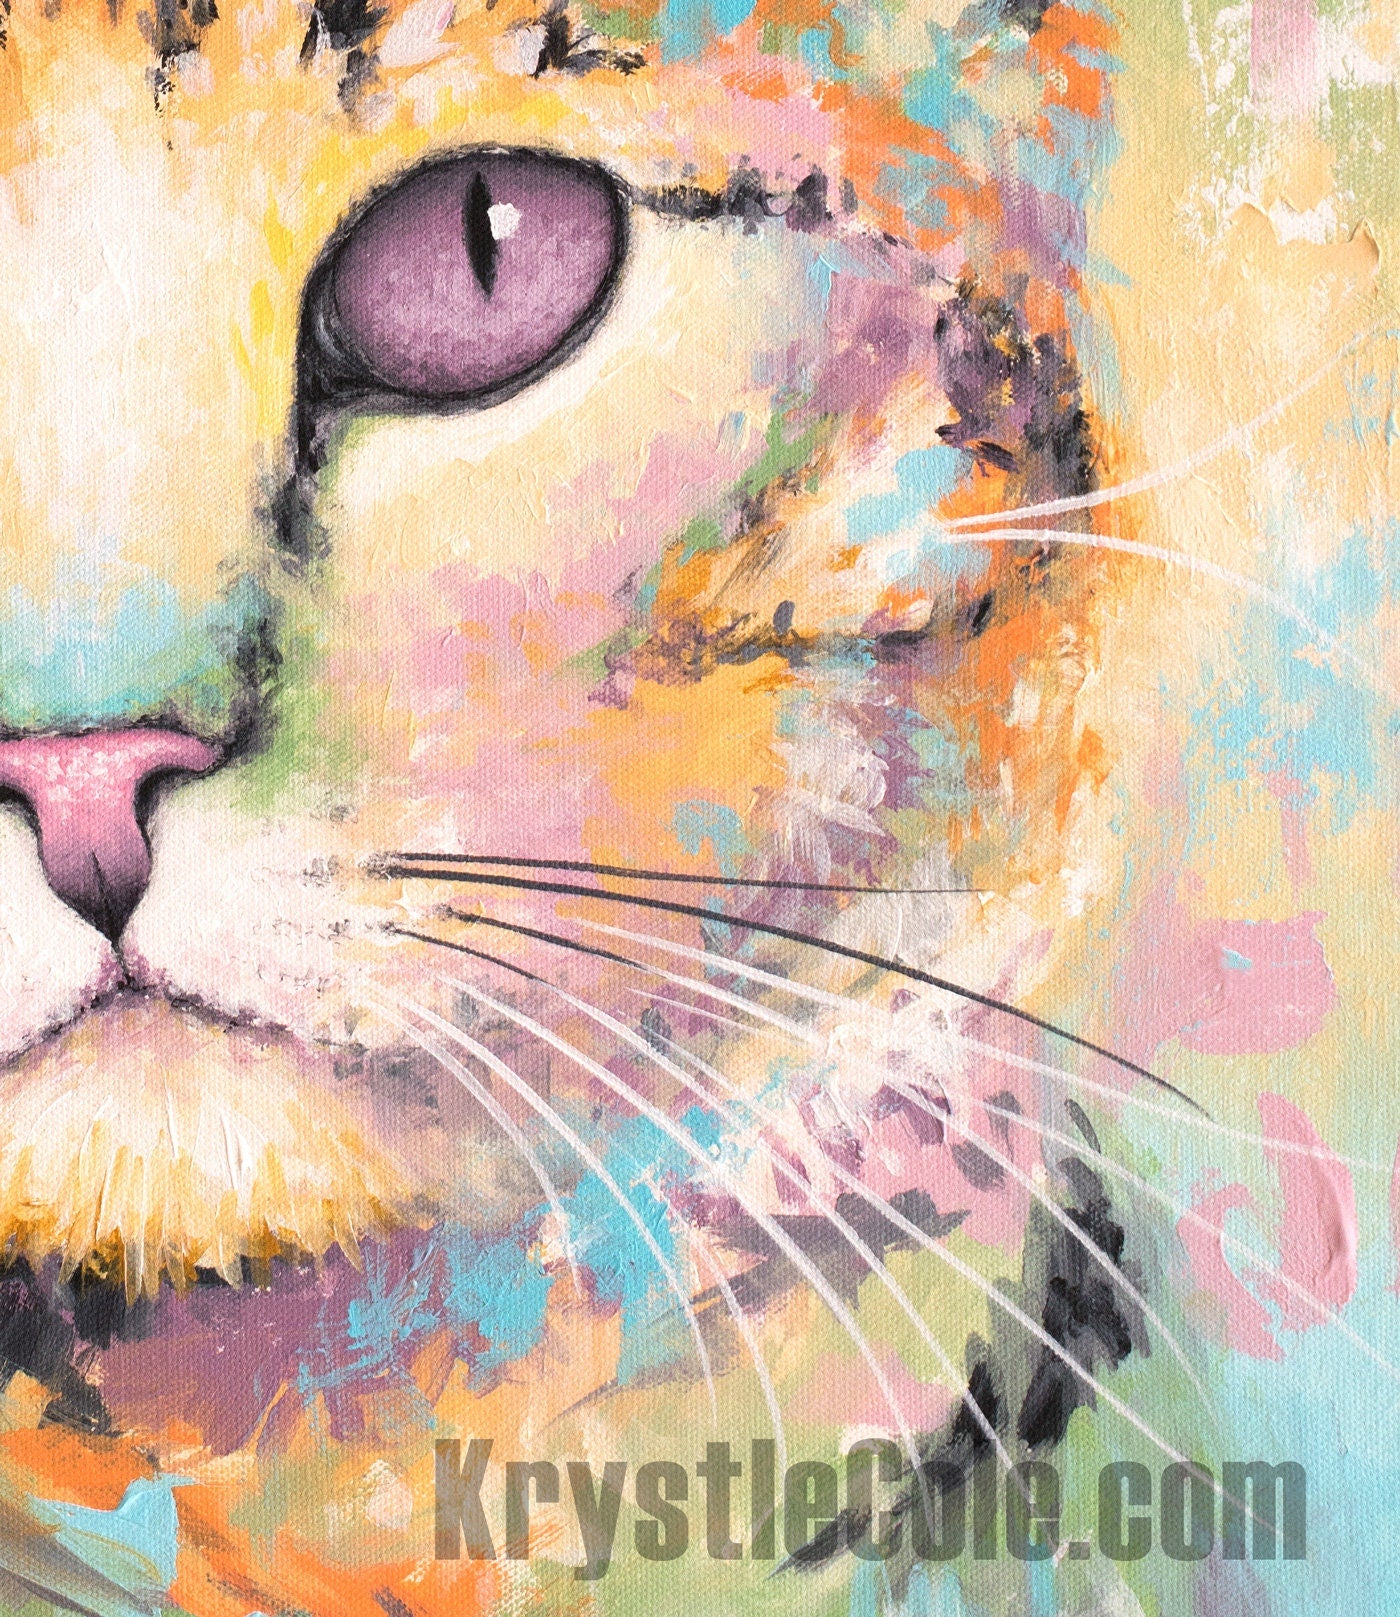 Orange Tabby Cat Painting - Cat Art Print on CANVAS or PAPER for Wall Decor or Gifts. Beautiful Cat Portrait by Krystle Cole